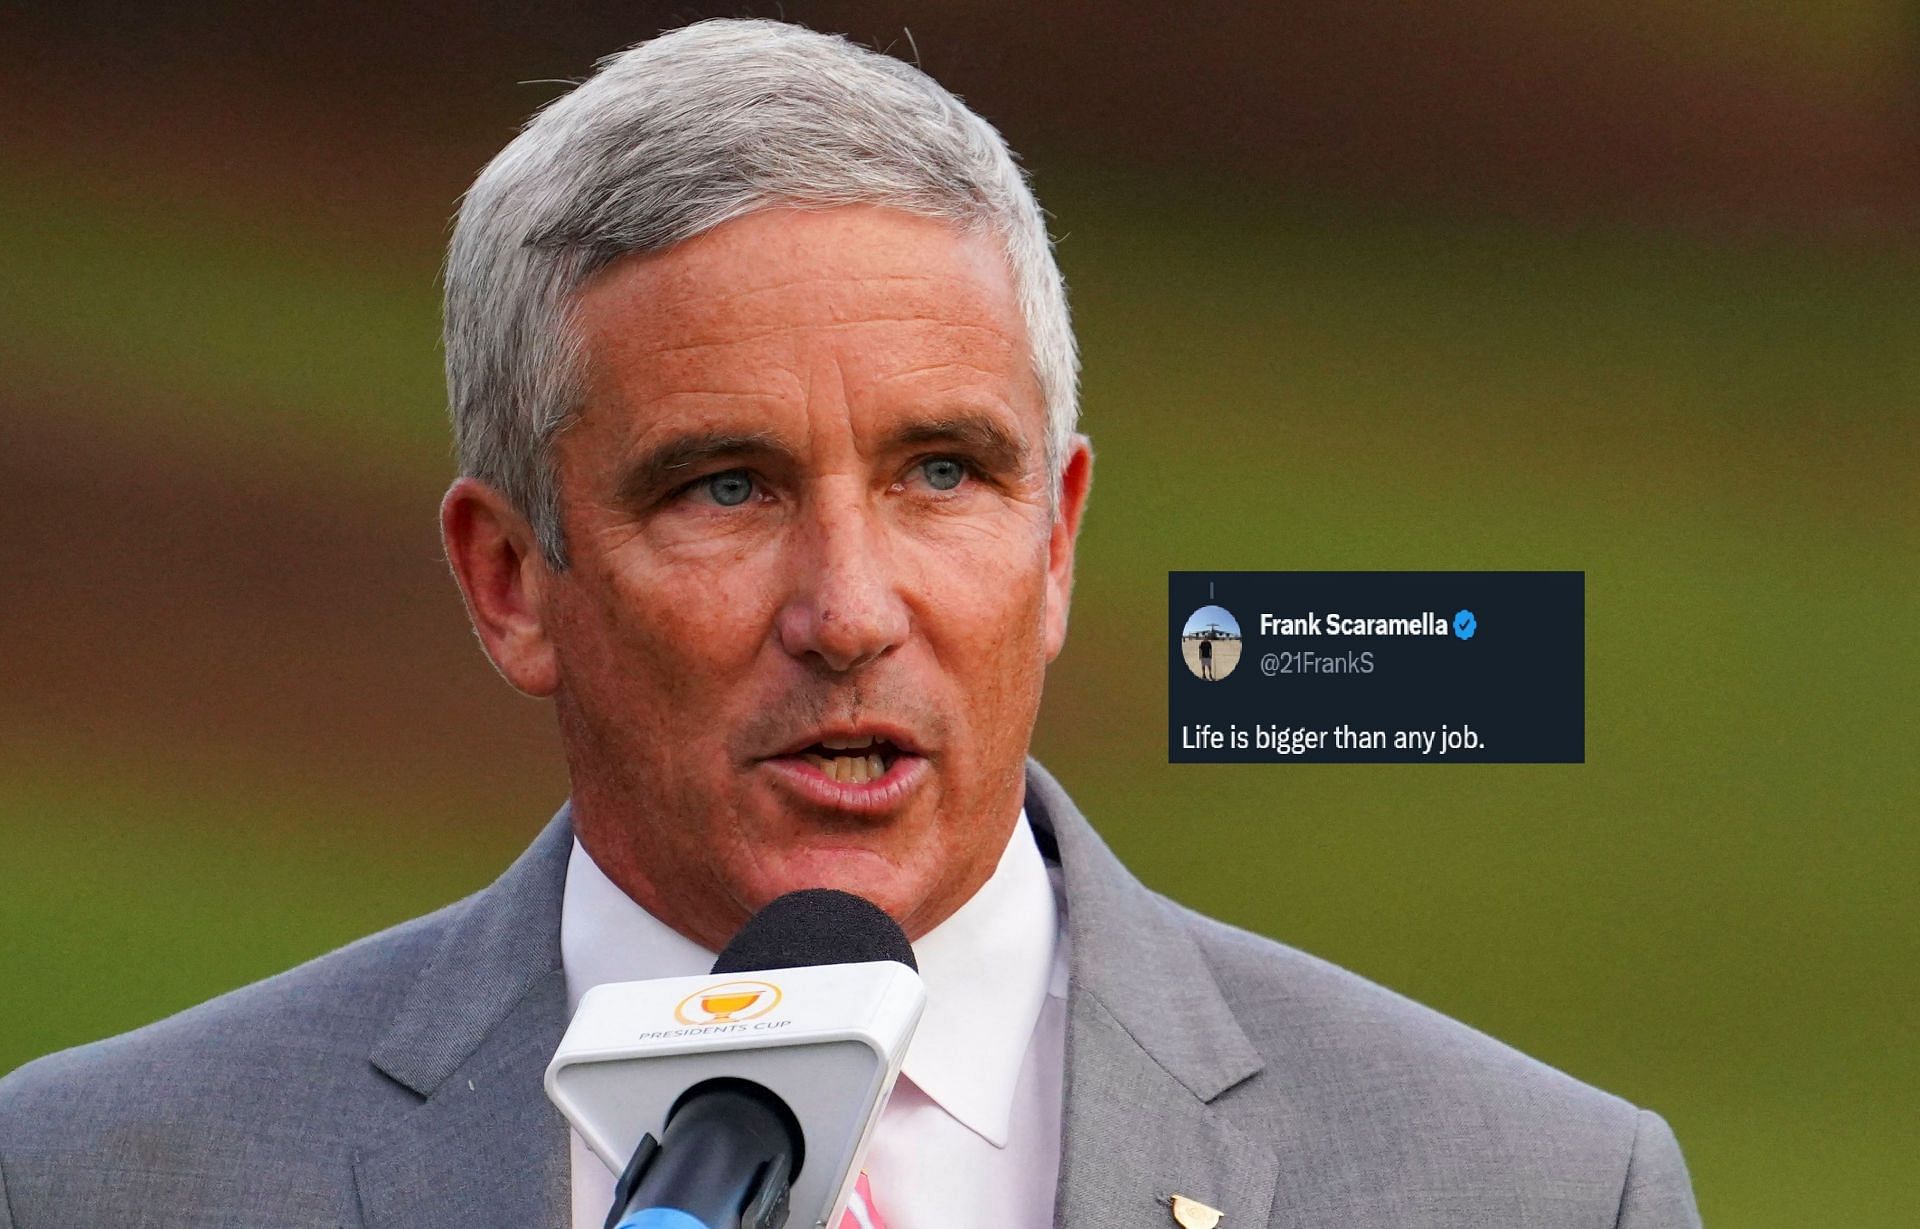 Jay Monahan steps away from the day to day duties at the PGA Tour, citing health problems